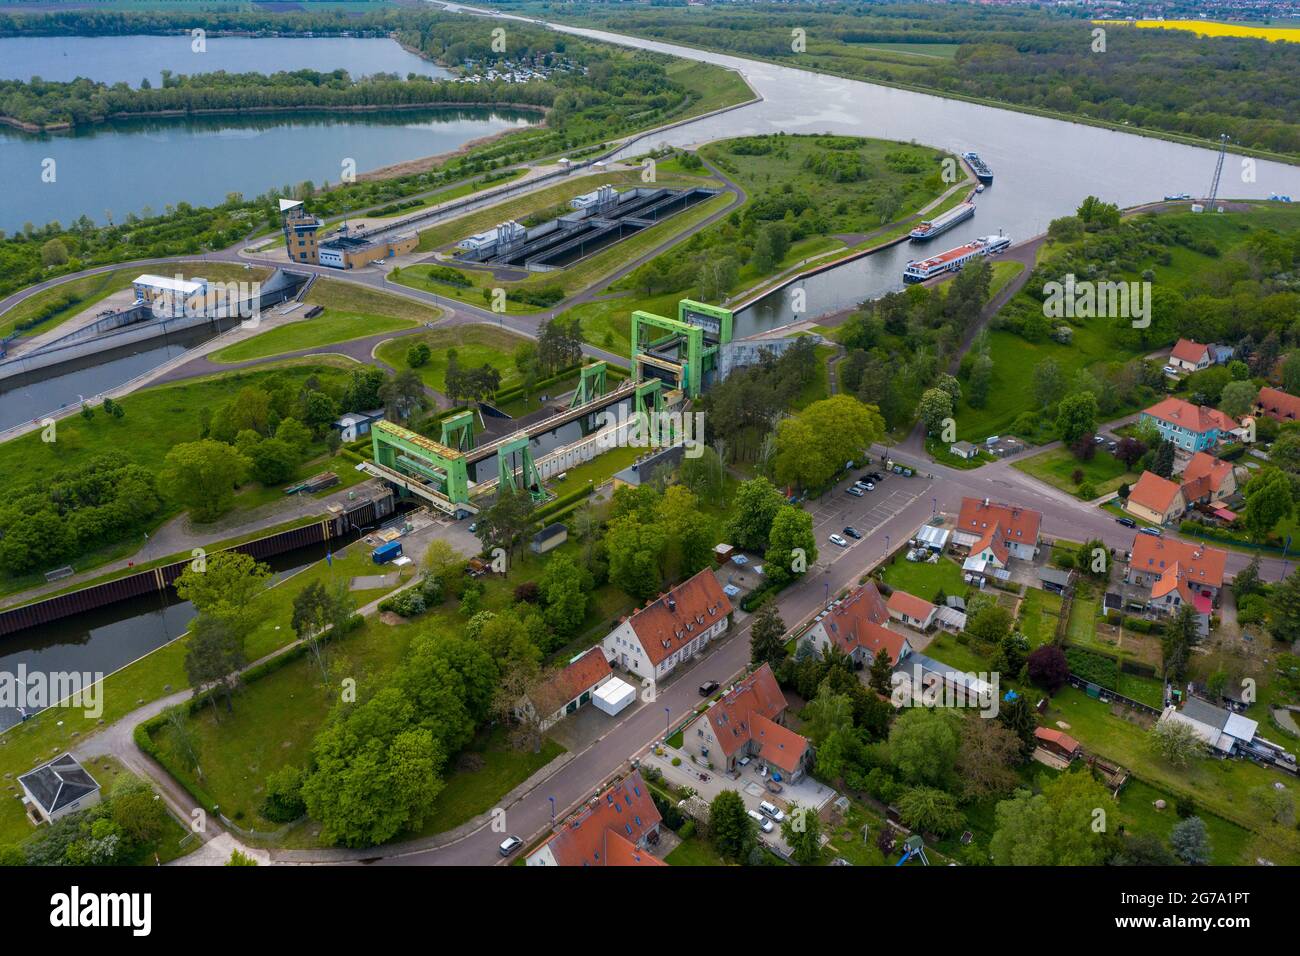 Germany, Saxony-Anhalt, Hohenwarthe, Rothensee lock on the Mittelland Canal, technical monument. Stock Photo